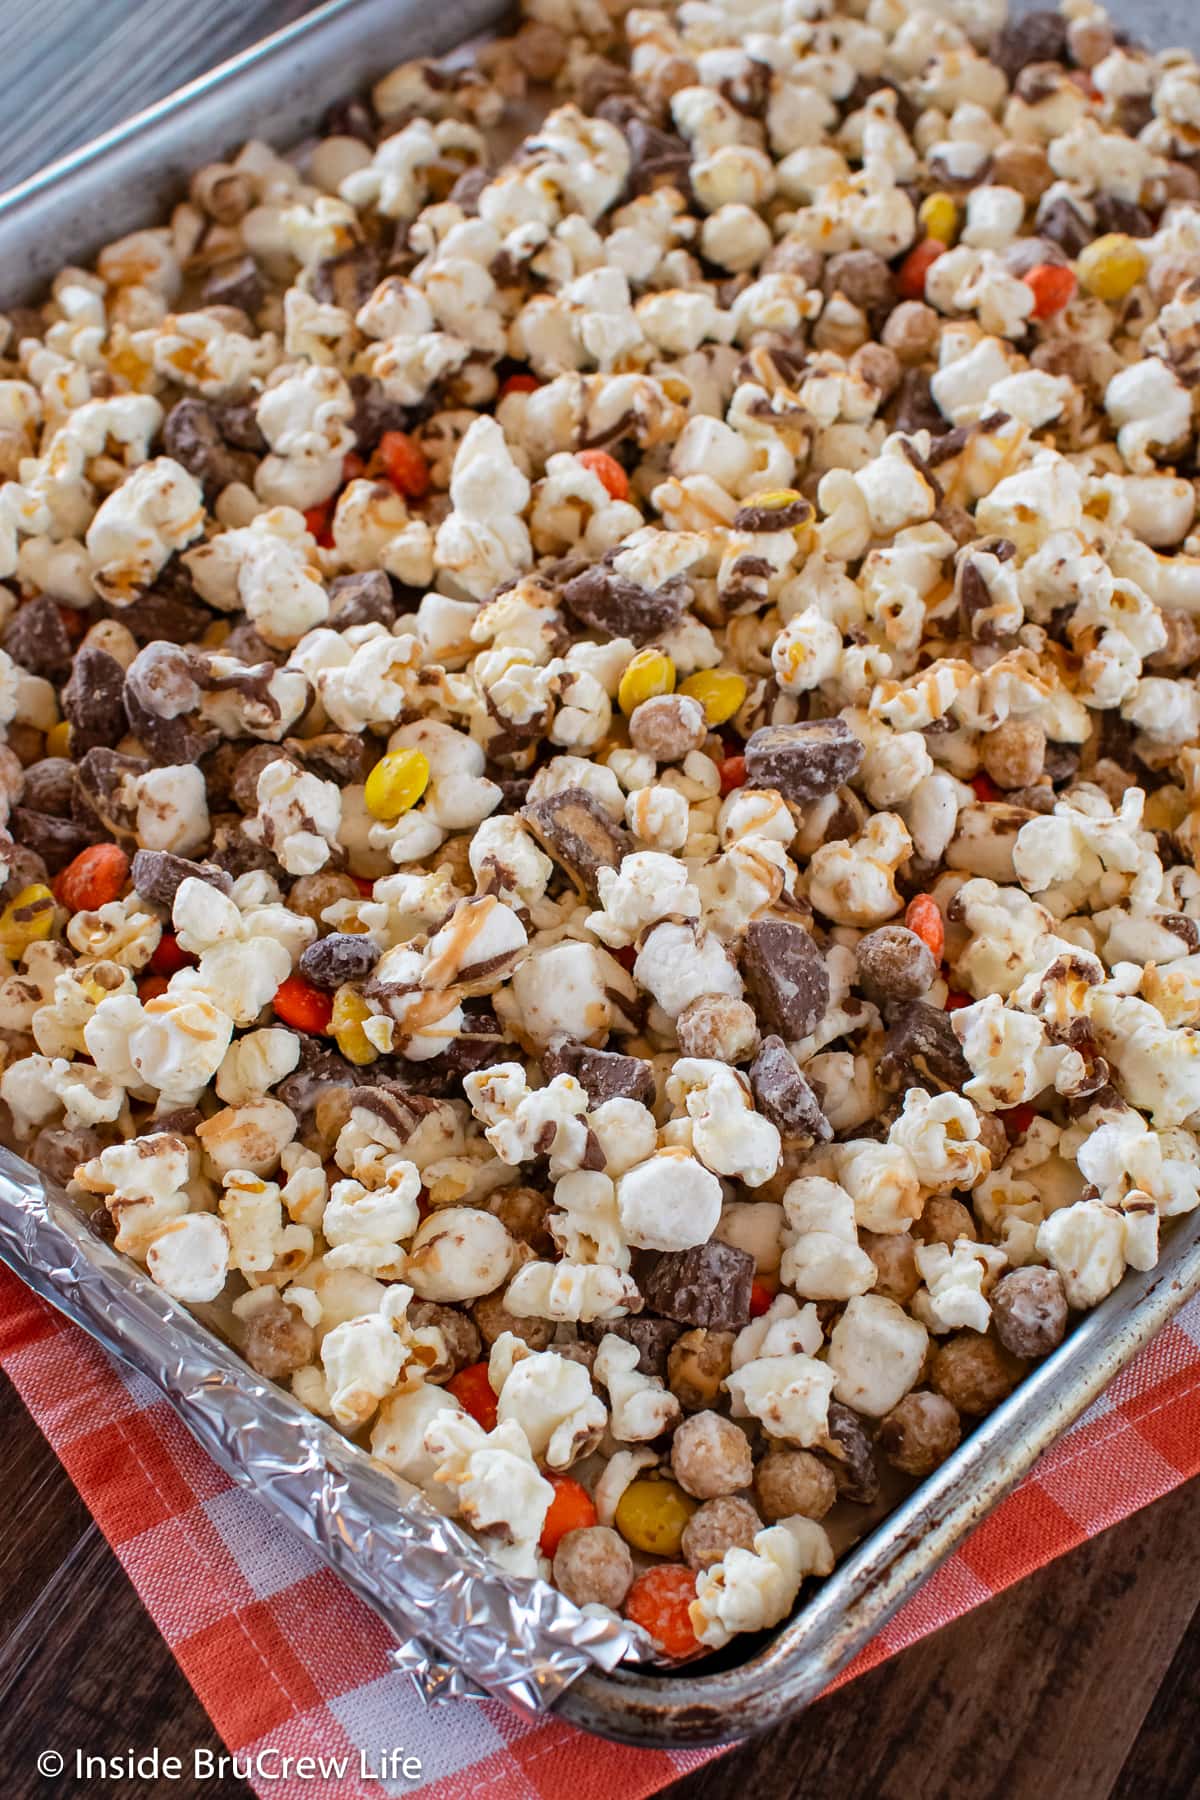 A silver sheet pan filled with popcorn and candy.